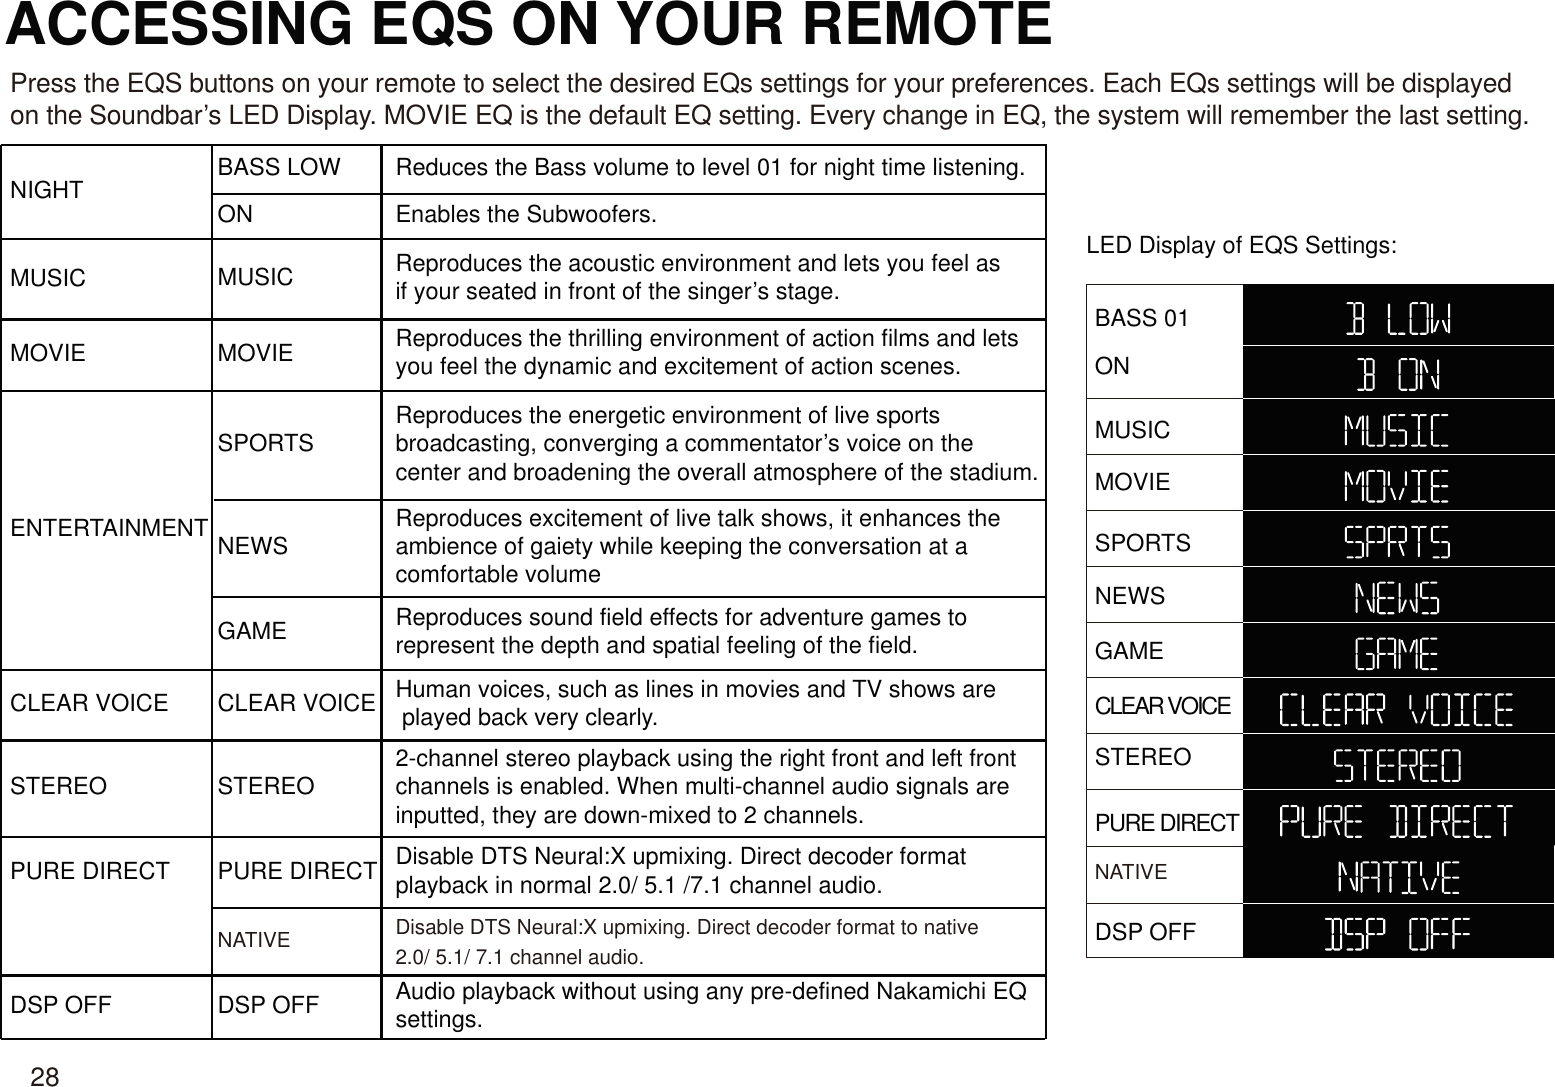 ACCESSING EQS ON YOUR REMOTE NIGHT BASS LOWONReduces the Bass volume to level 01 for night time listening.Enables the Subwoofers.MUSIC MUSIC Reproduces the acoustic environment and lets you feel as if your seated in front of the singer’s stage.MOVIE MOVIE Reproduces the thrilling environment of action films and lets you feel the dynamic and excitement of action scenes.ENTERTAINMENTSPORTSNEWSReproduces the energetic environment of live sports broadcasting, converging a commentator’s voice on the center and broadening the overall atmosphere of the stadium. Reproduces excitement of live talk shows, it enhances the ambience of gaiety while keeping the conversation at a comfortable volume GAME Reproduces sound field effects for adventure games to represent the depth and spatial feeling of the field. CLEAR VOICE CLEAR VOICE Human voices, such as lines in movies and TV shows are played back very clearly.STEREO STEREO 2-channel stereo playback using the right front and left front channels is enabled. When multi-channel audio signals are inputted, they are down-mixed to 2 channels.PURE DIRECT PURE DIRECT Disable DTS Neural:X upmixing. Direct decoder format playback in normal 2.0/ 5.1 /7.1 channel audio.DSP OFF DSP OFF Audio playback without using any pre-defined Nakamichi EQ settings.+Press the EQS buttons on your remote to select the desired EQs settings for your preferences. Each EQs settings will be displayed on the Soundbar’s LED Display. MOVIE EQ is the default EQ setting. Every change in EQ, the system will remember the last setting.NATIVE Disable DTS Neural:X upmixing. Direct decoder format to native 2.0/ 5.1/ 7.1 channel audio.LED Display of EQS Settings:BASS 01ONMUSICMOVIESPORTSNEWSGAMECLEAR VOICESTEREOPURE DIRECTDSP OFFNATIVE28